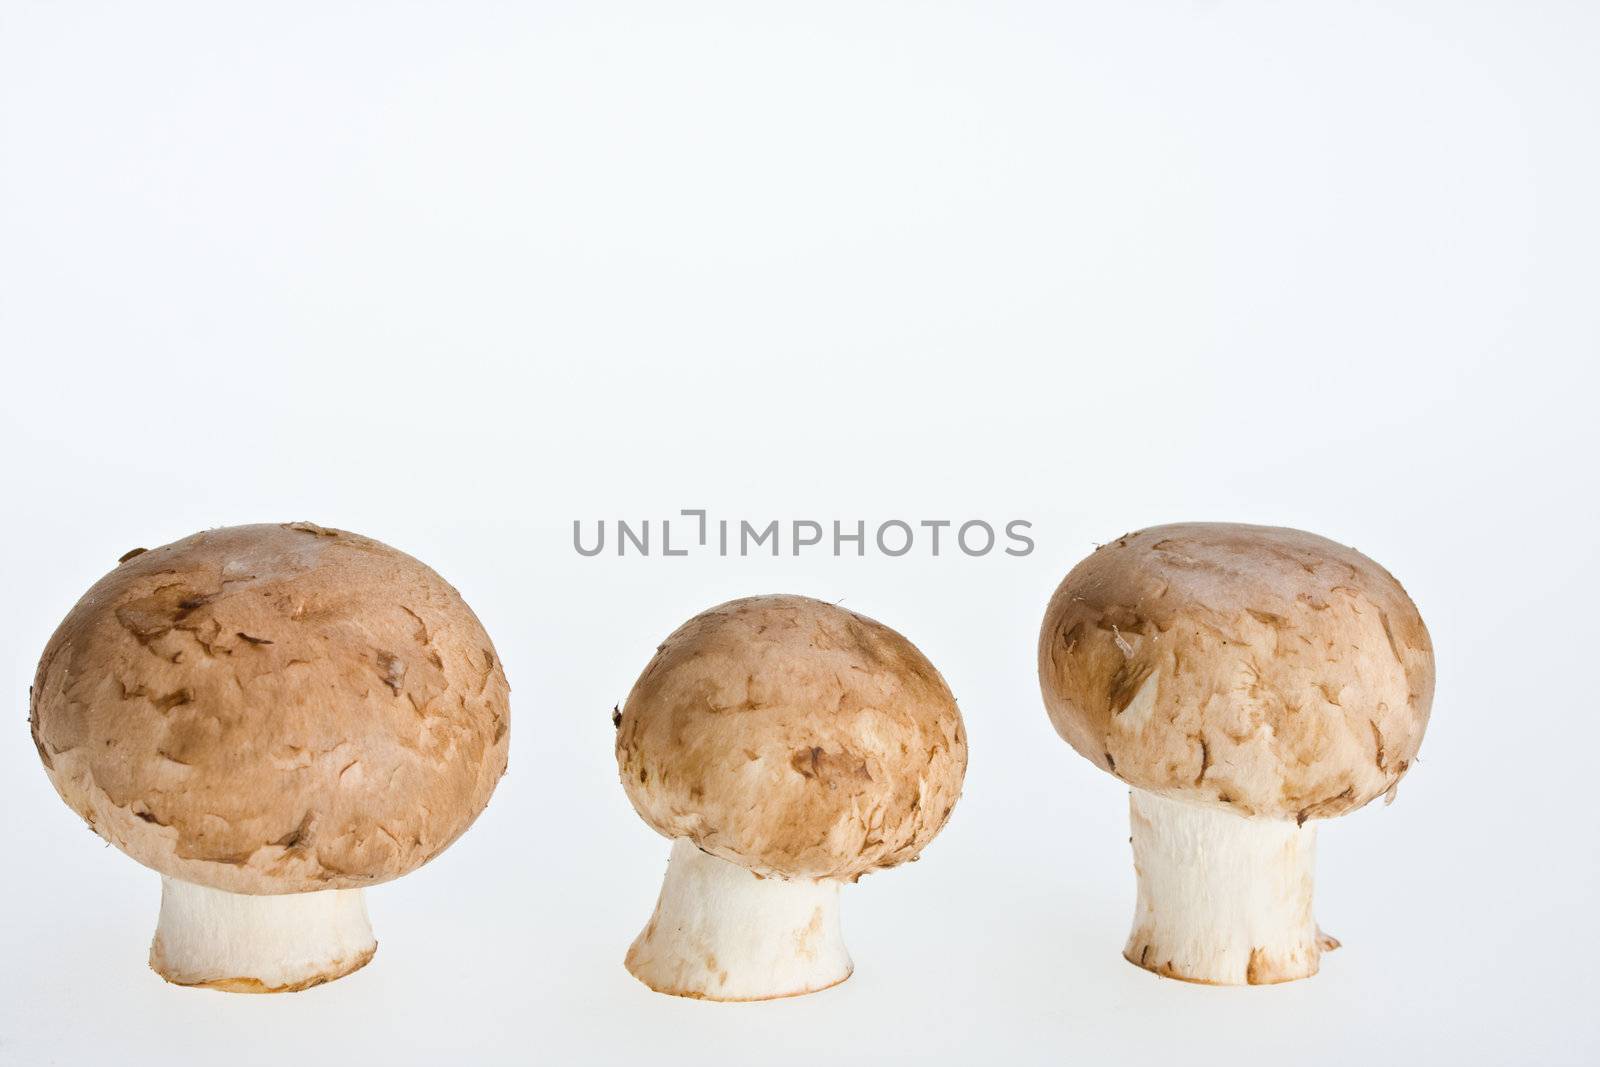 group of mushrooms isolated on white background by bernjuer